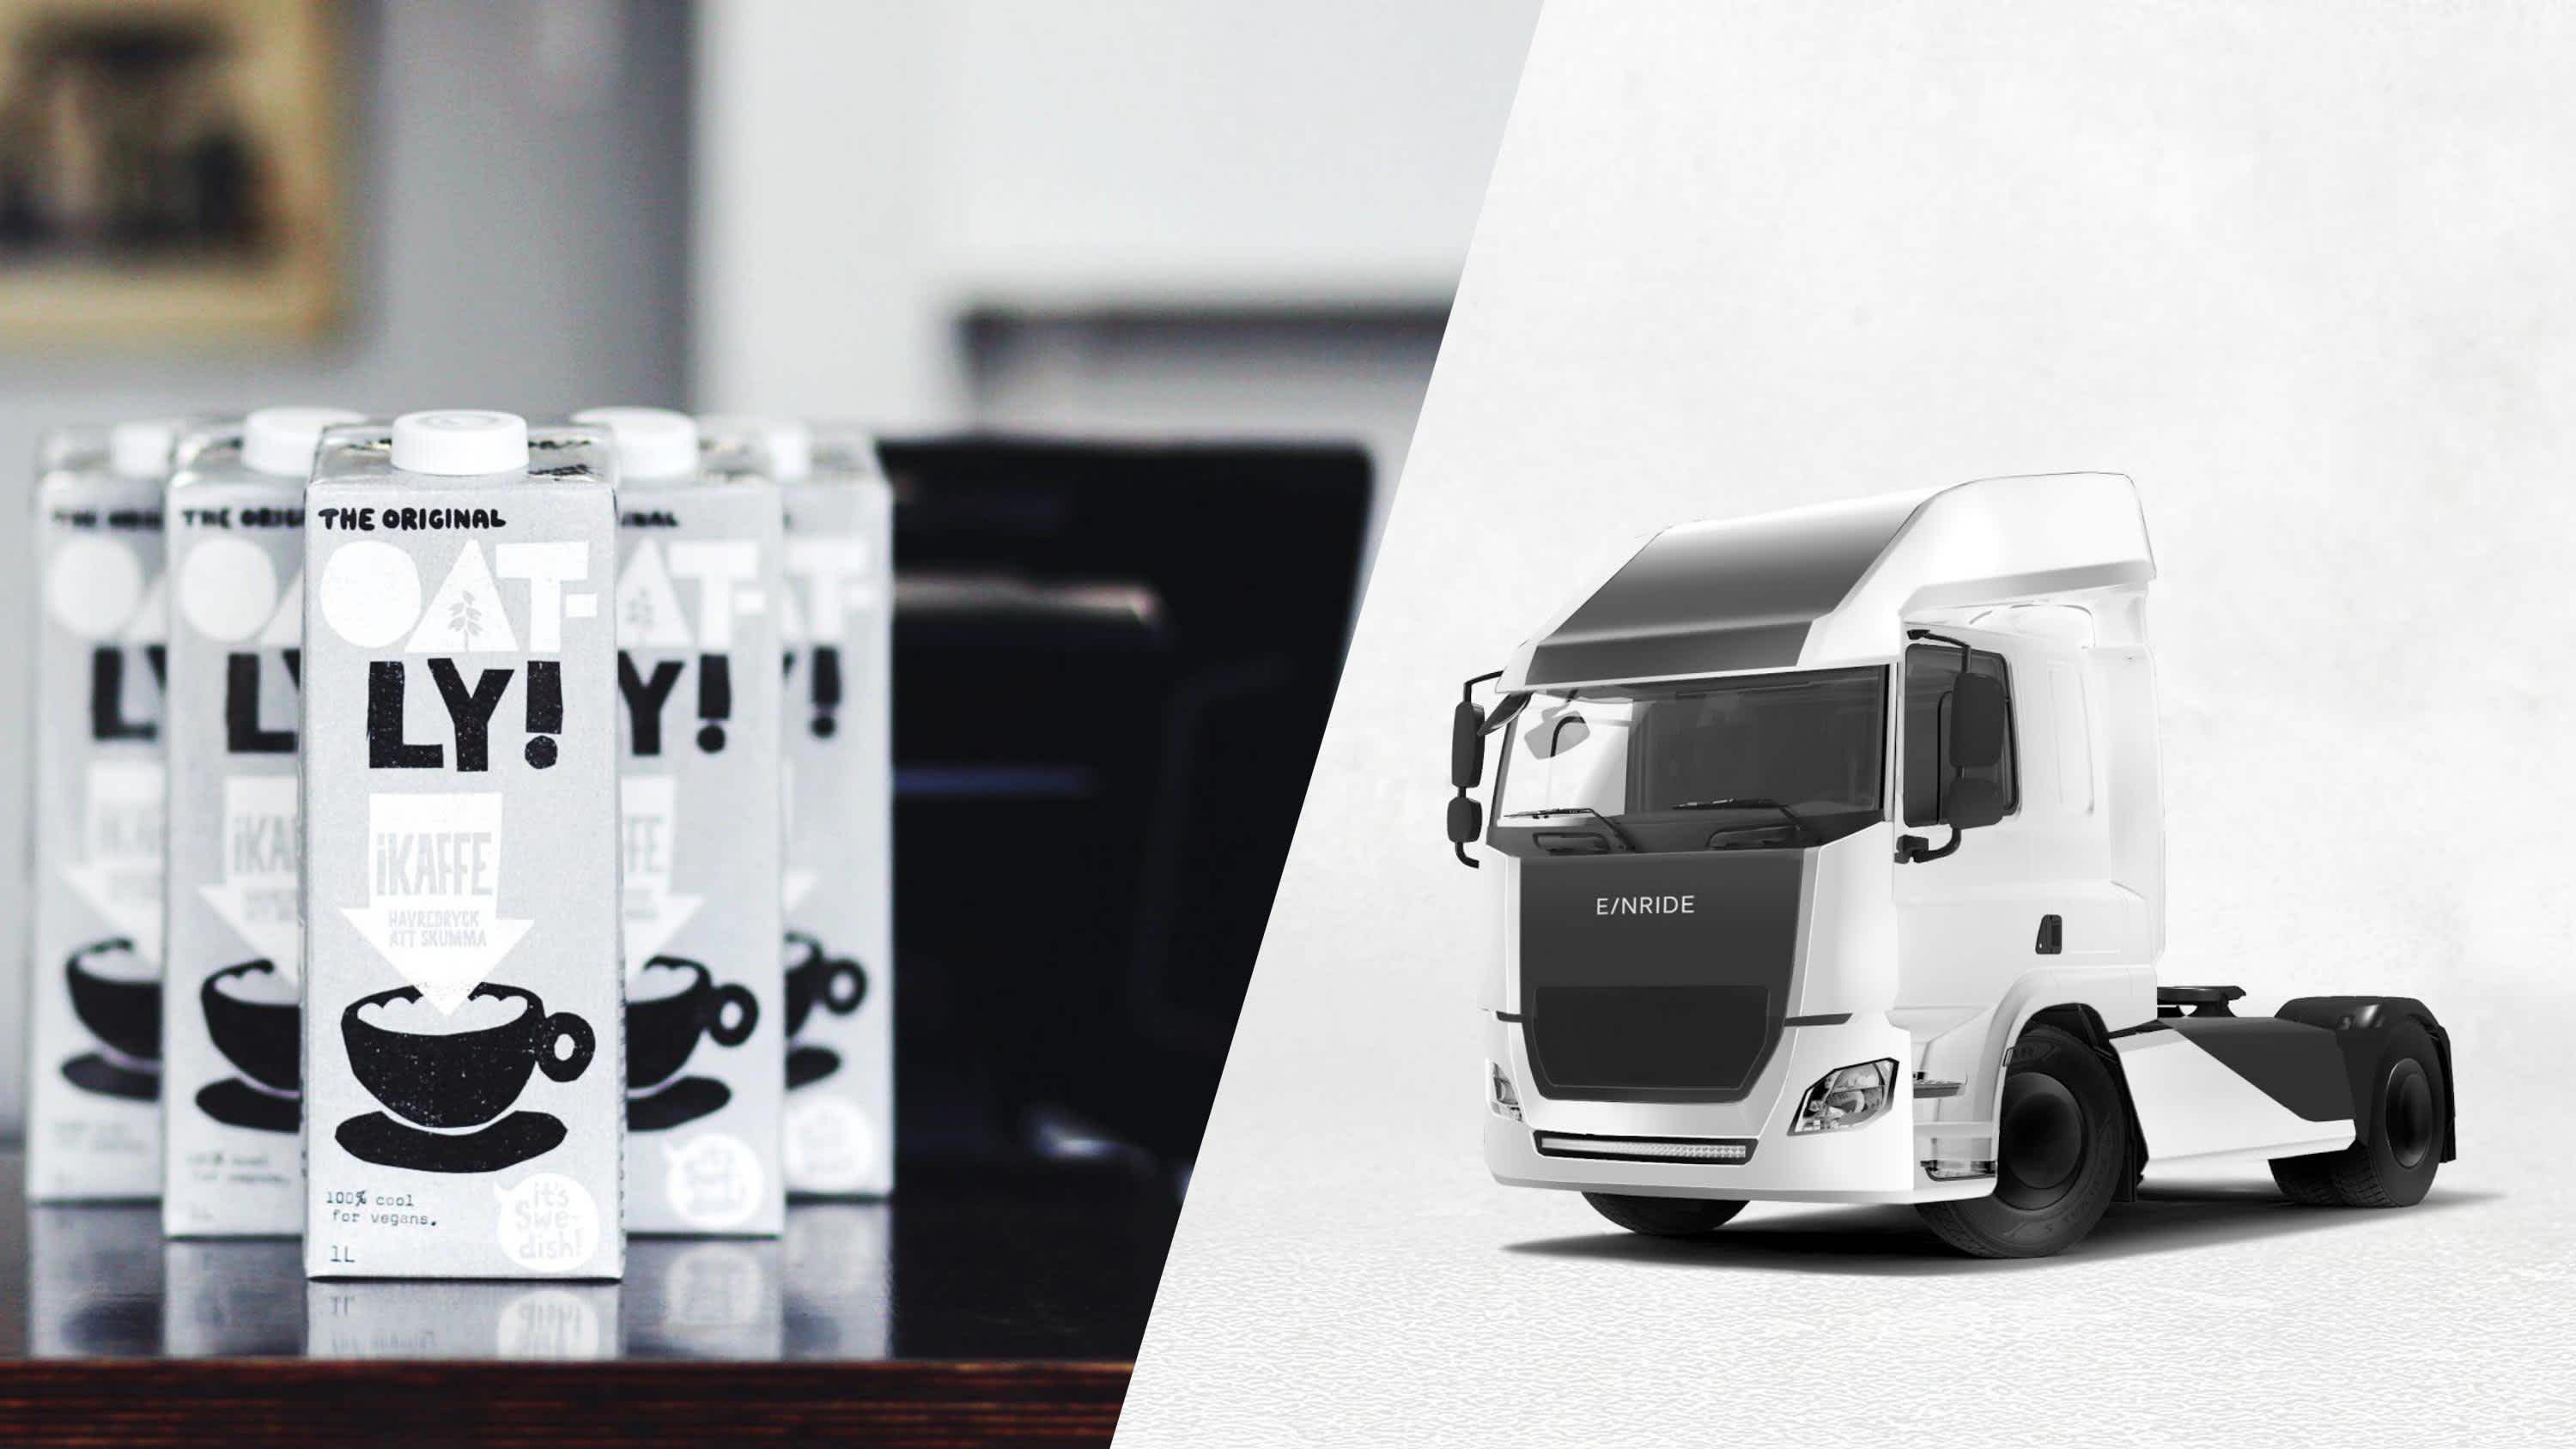 Oatly and Einride team up for sustainable transport in Sweden with electric trucks